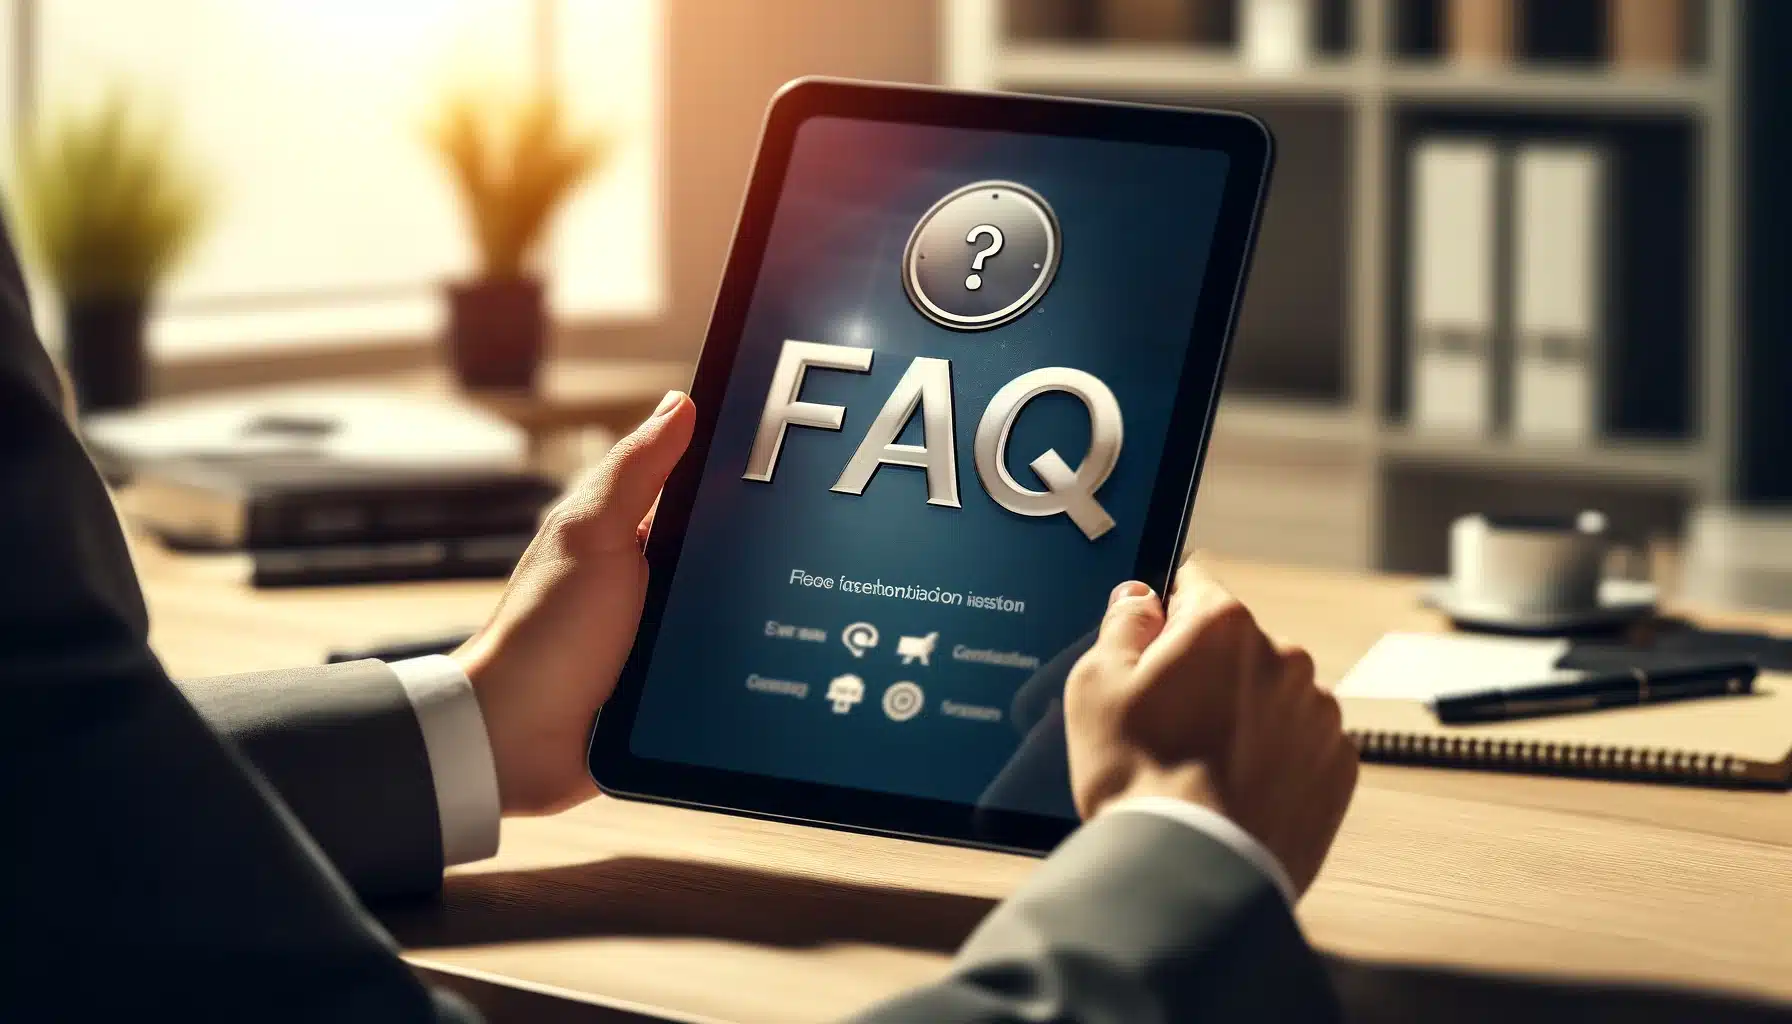 Person using a tablet with 'FAQ' prominently displayed on the screen in a professional setting